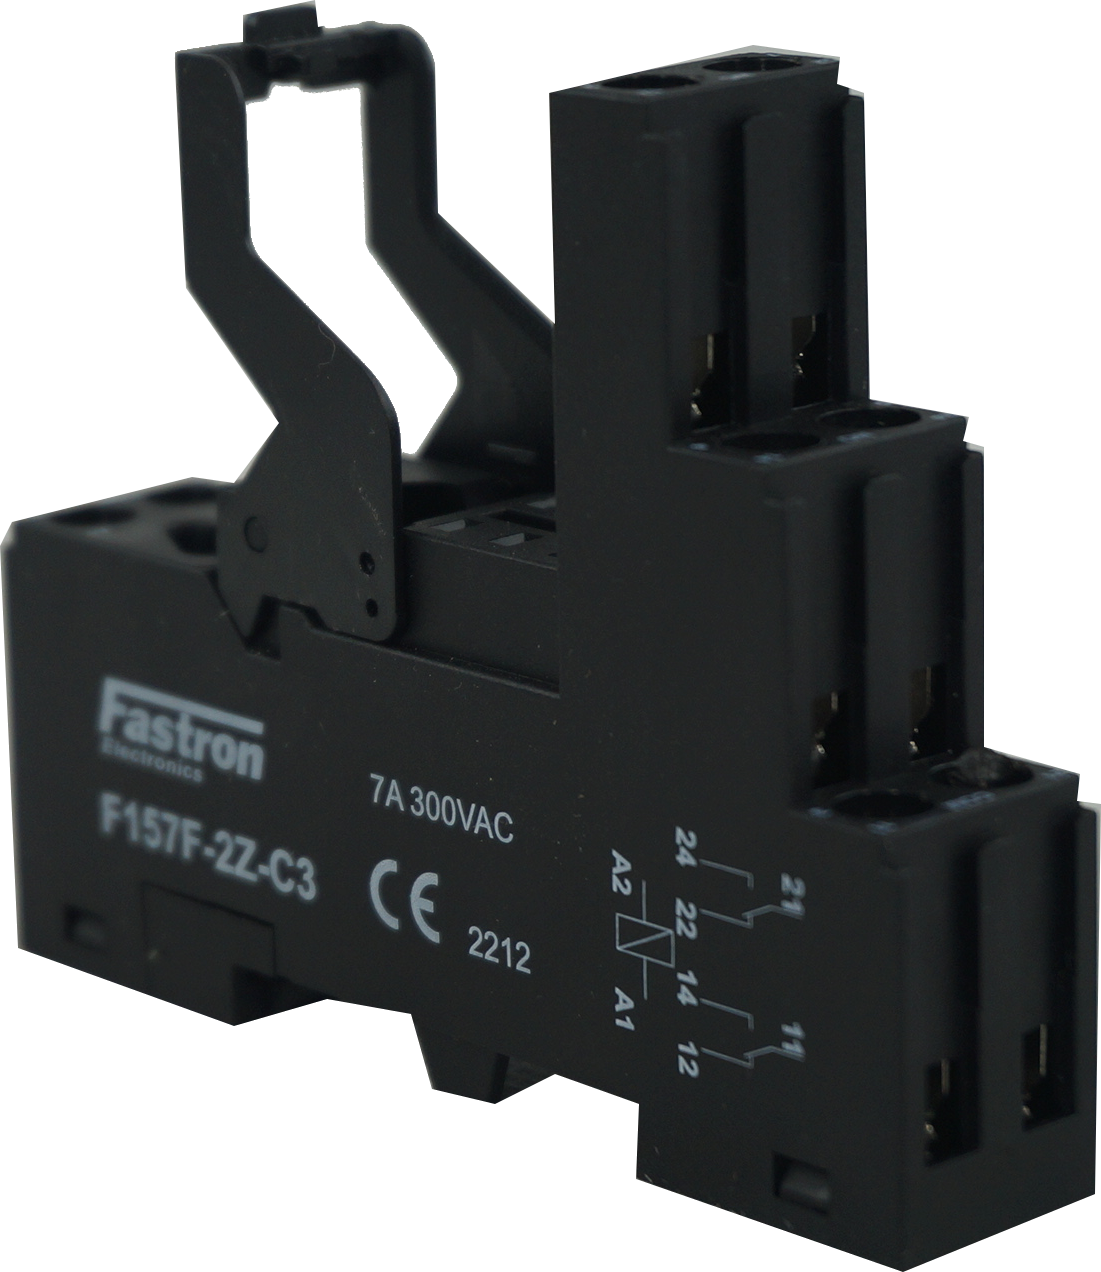 F157F-2Z-C3, 5 Pin Relay Socket, Rated for 2 x SPDT 10 Amp, 250VAC/30VDC Load, up to 250VAC Coil